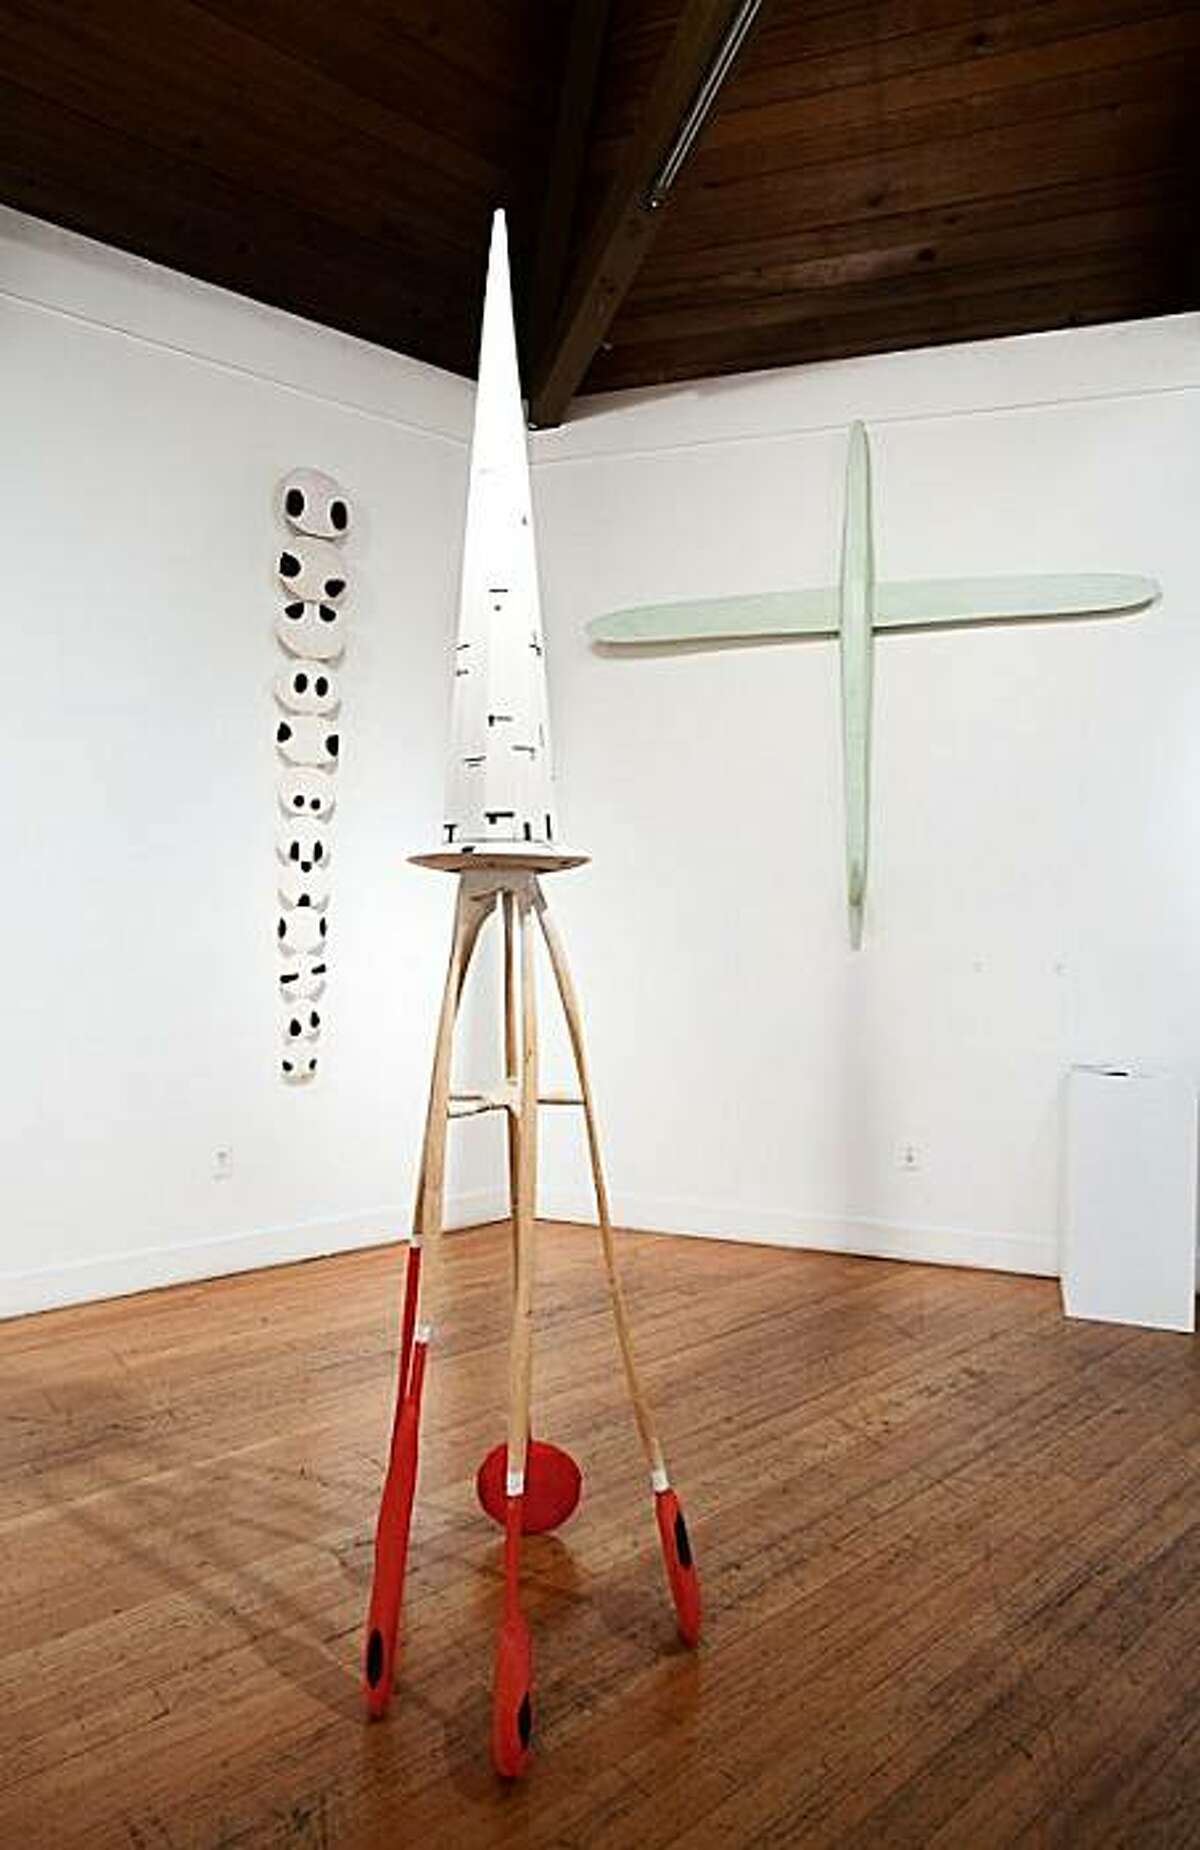 Installation view of "Local Treasures: Six Extraordinary Artists" at Berkeley Art Center, showing (l. to r.) "Towtom," "Area 51" and "Stead" (all undated) wood sculpture by Robert Brady